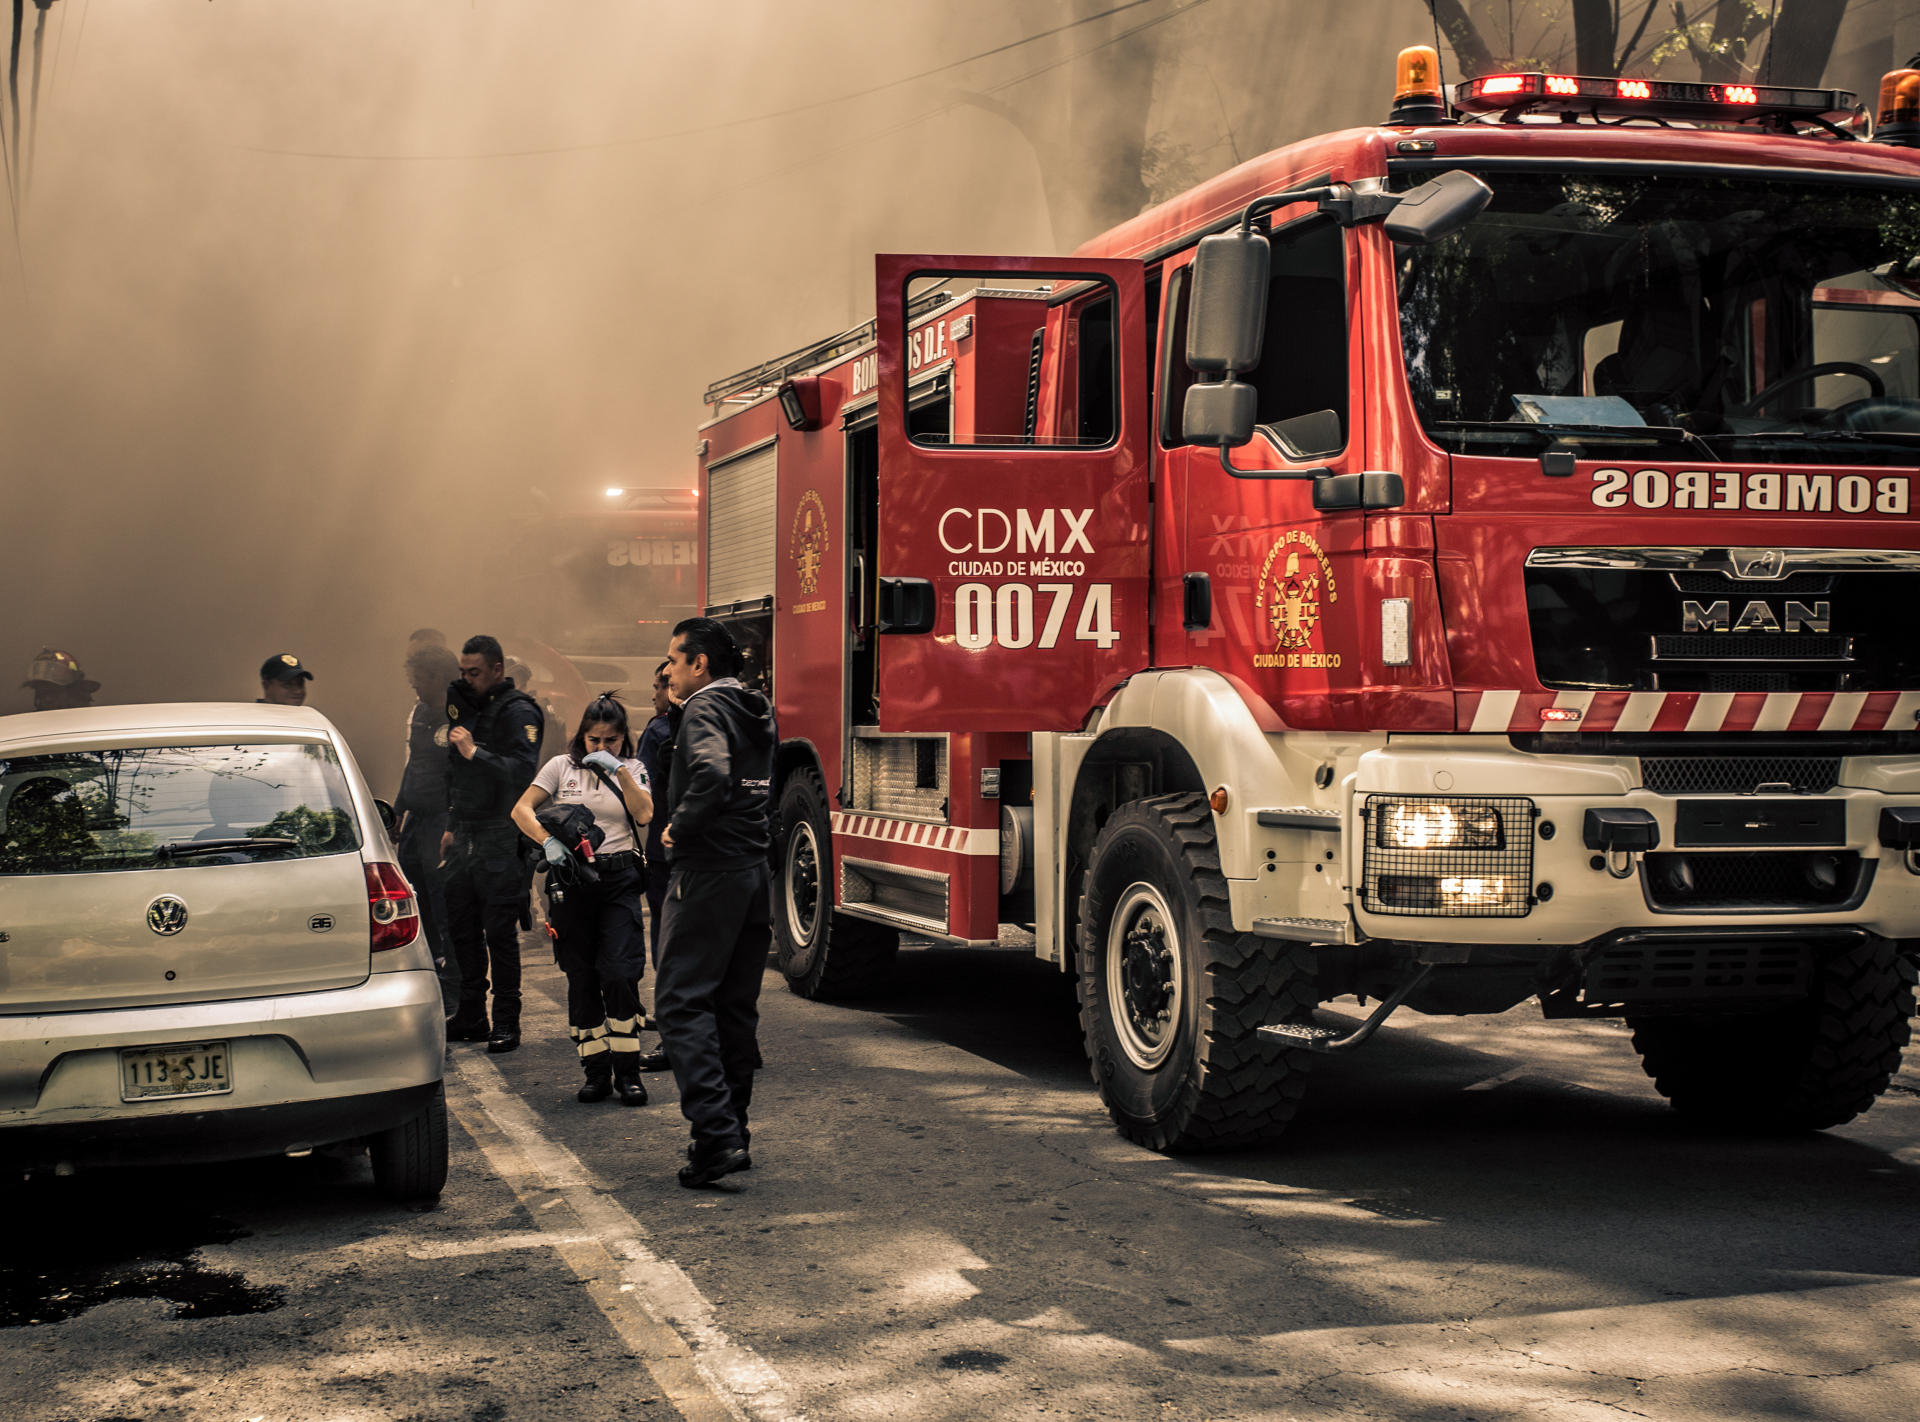 Fire, explosion at an alcohol factory leaves one injured in Mexico City